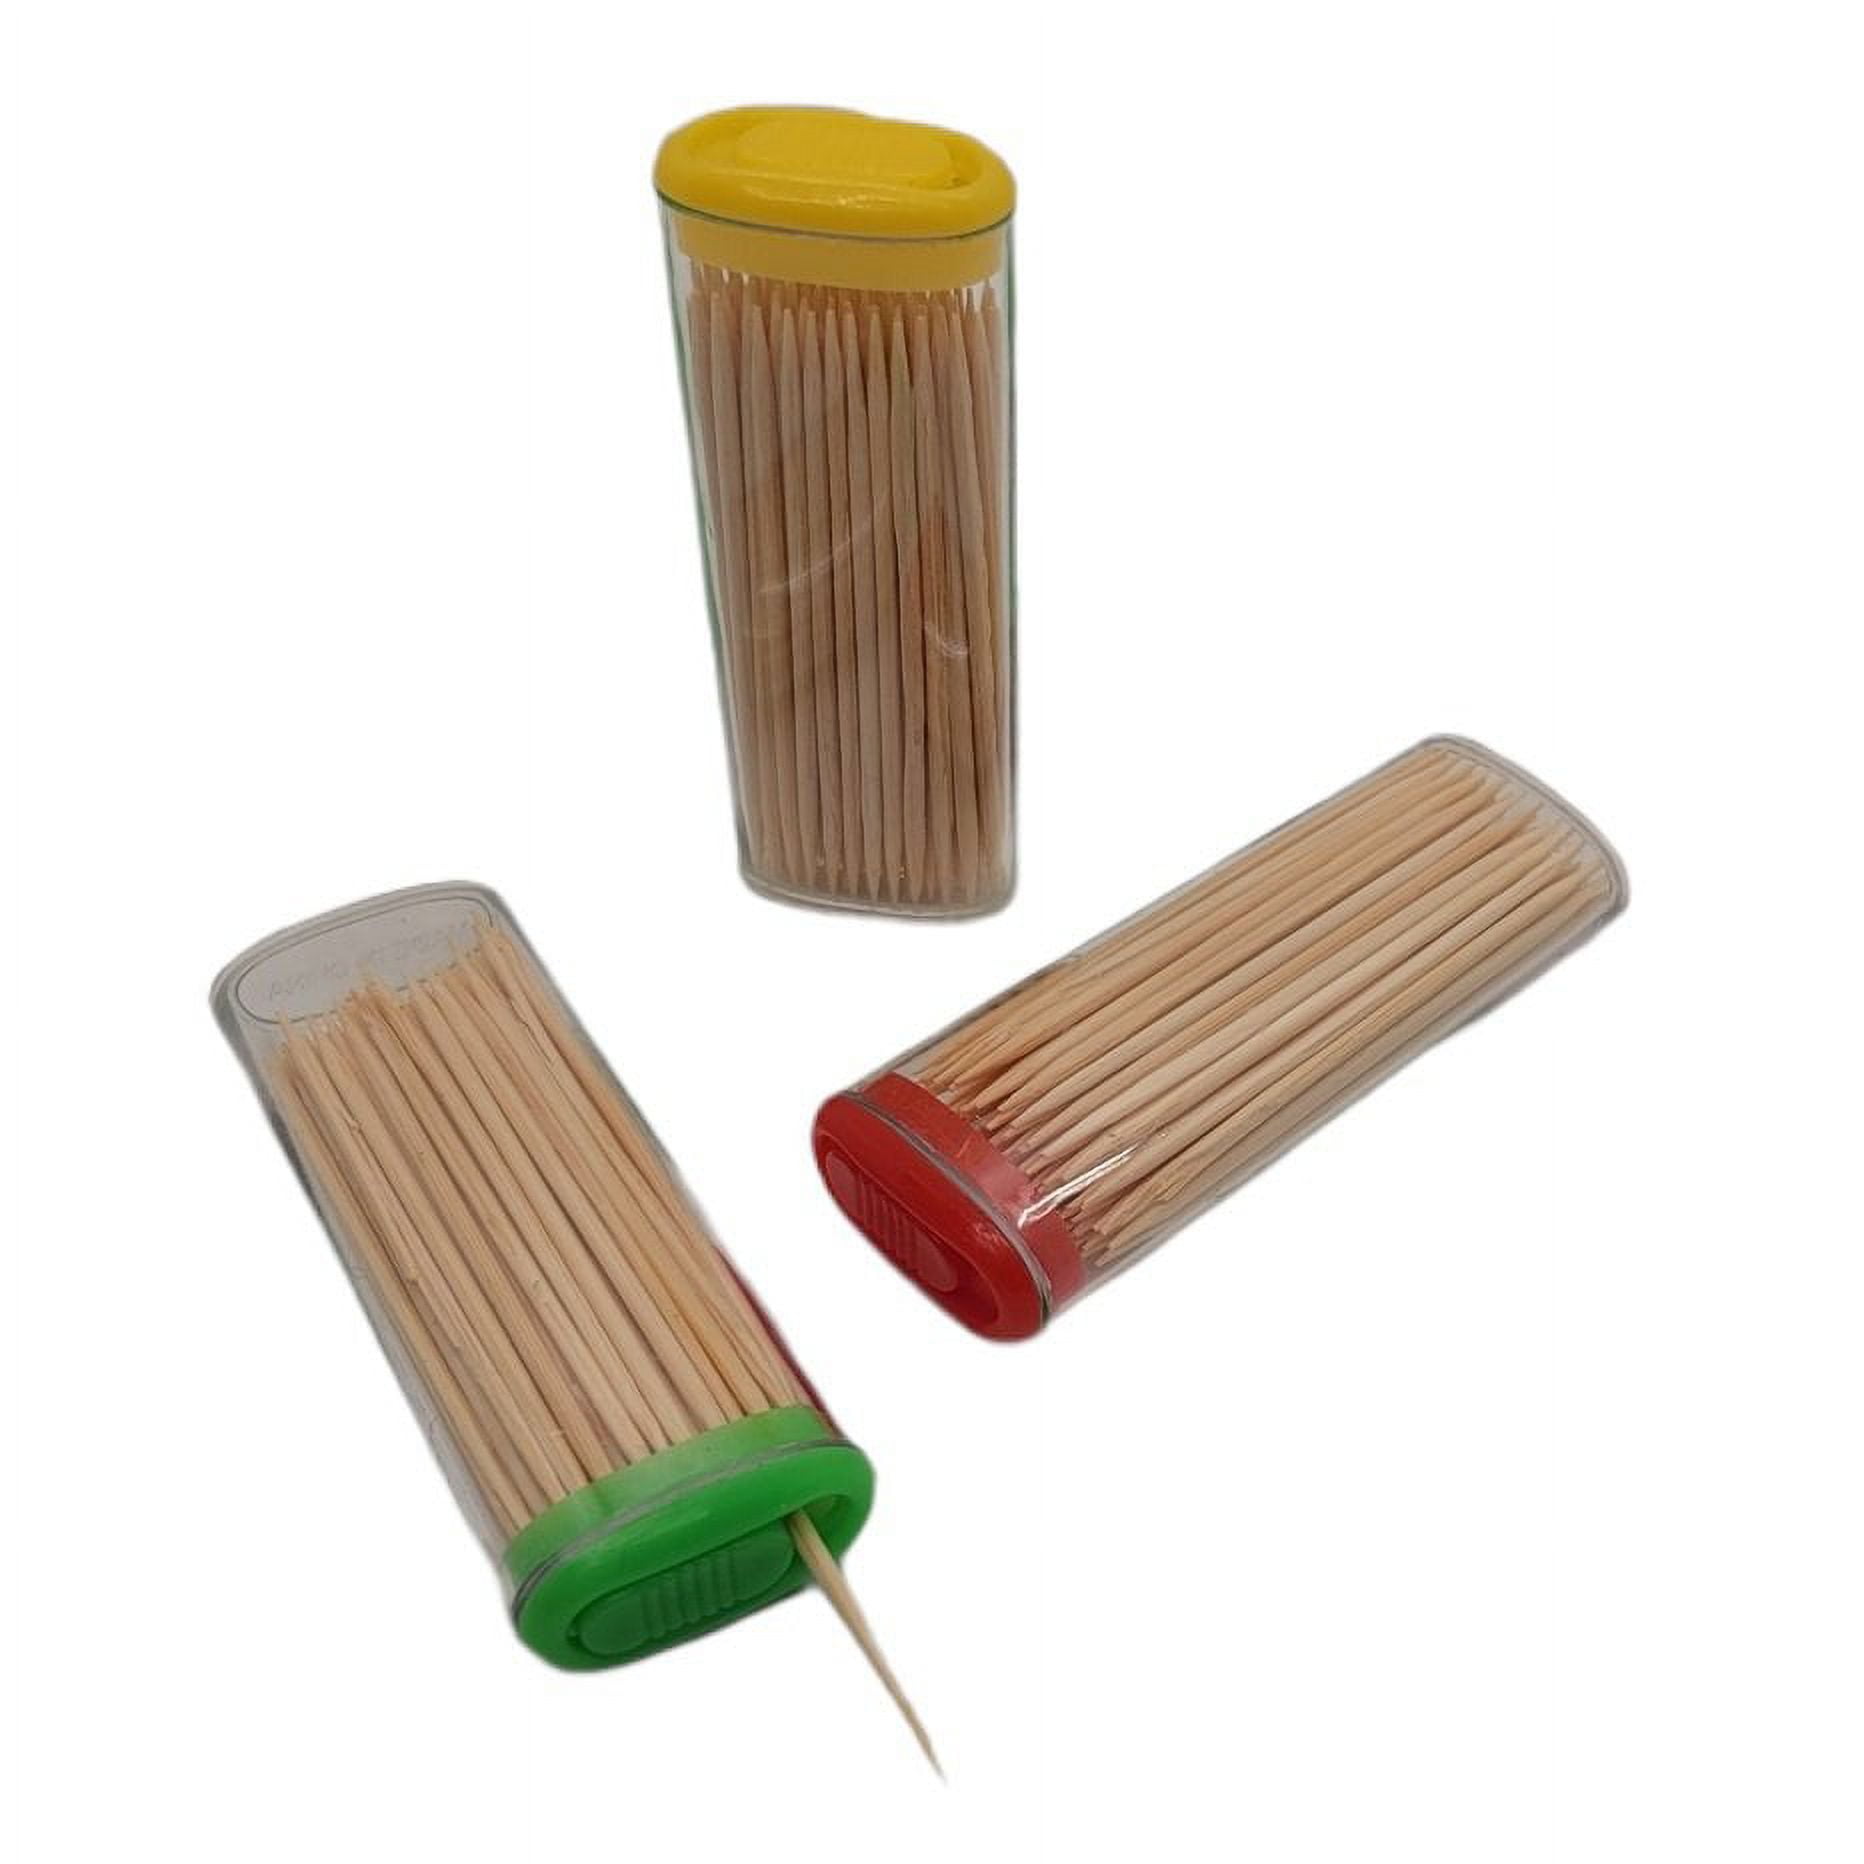 1pc Portable Wood Toothpick Holder Pocket Tooth Pick Dispenser  Bucket,Wood+Stainless Steel(Reminder To Customer Service To Use Self  Sealing Bags For Packaging When Placing An Order)